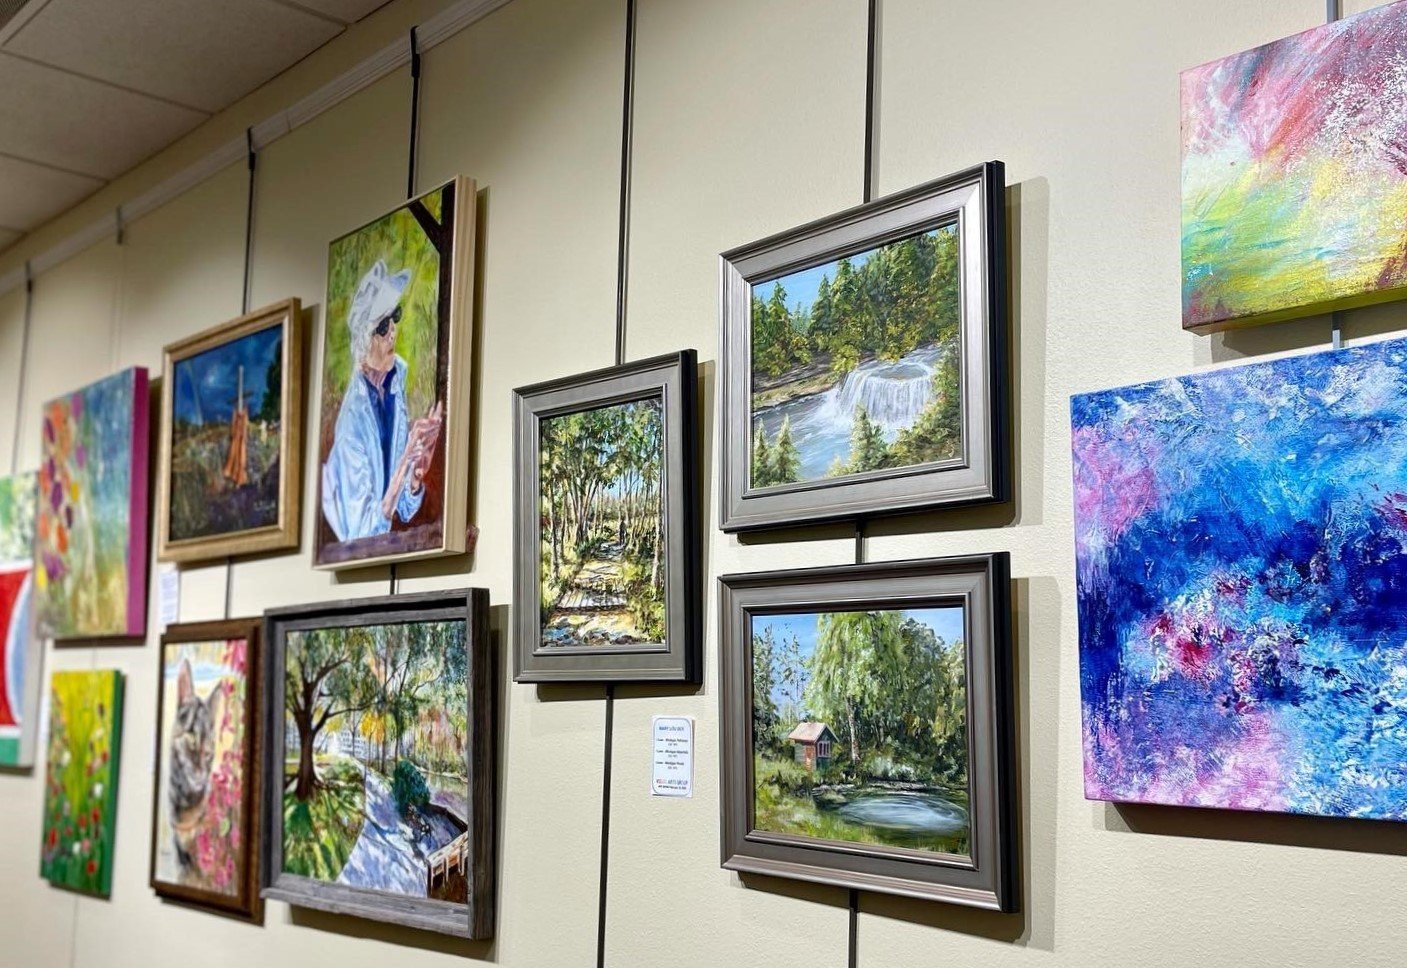 All artwork in Cypress Village’s Visual Arts Show was created by residents.